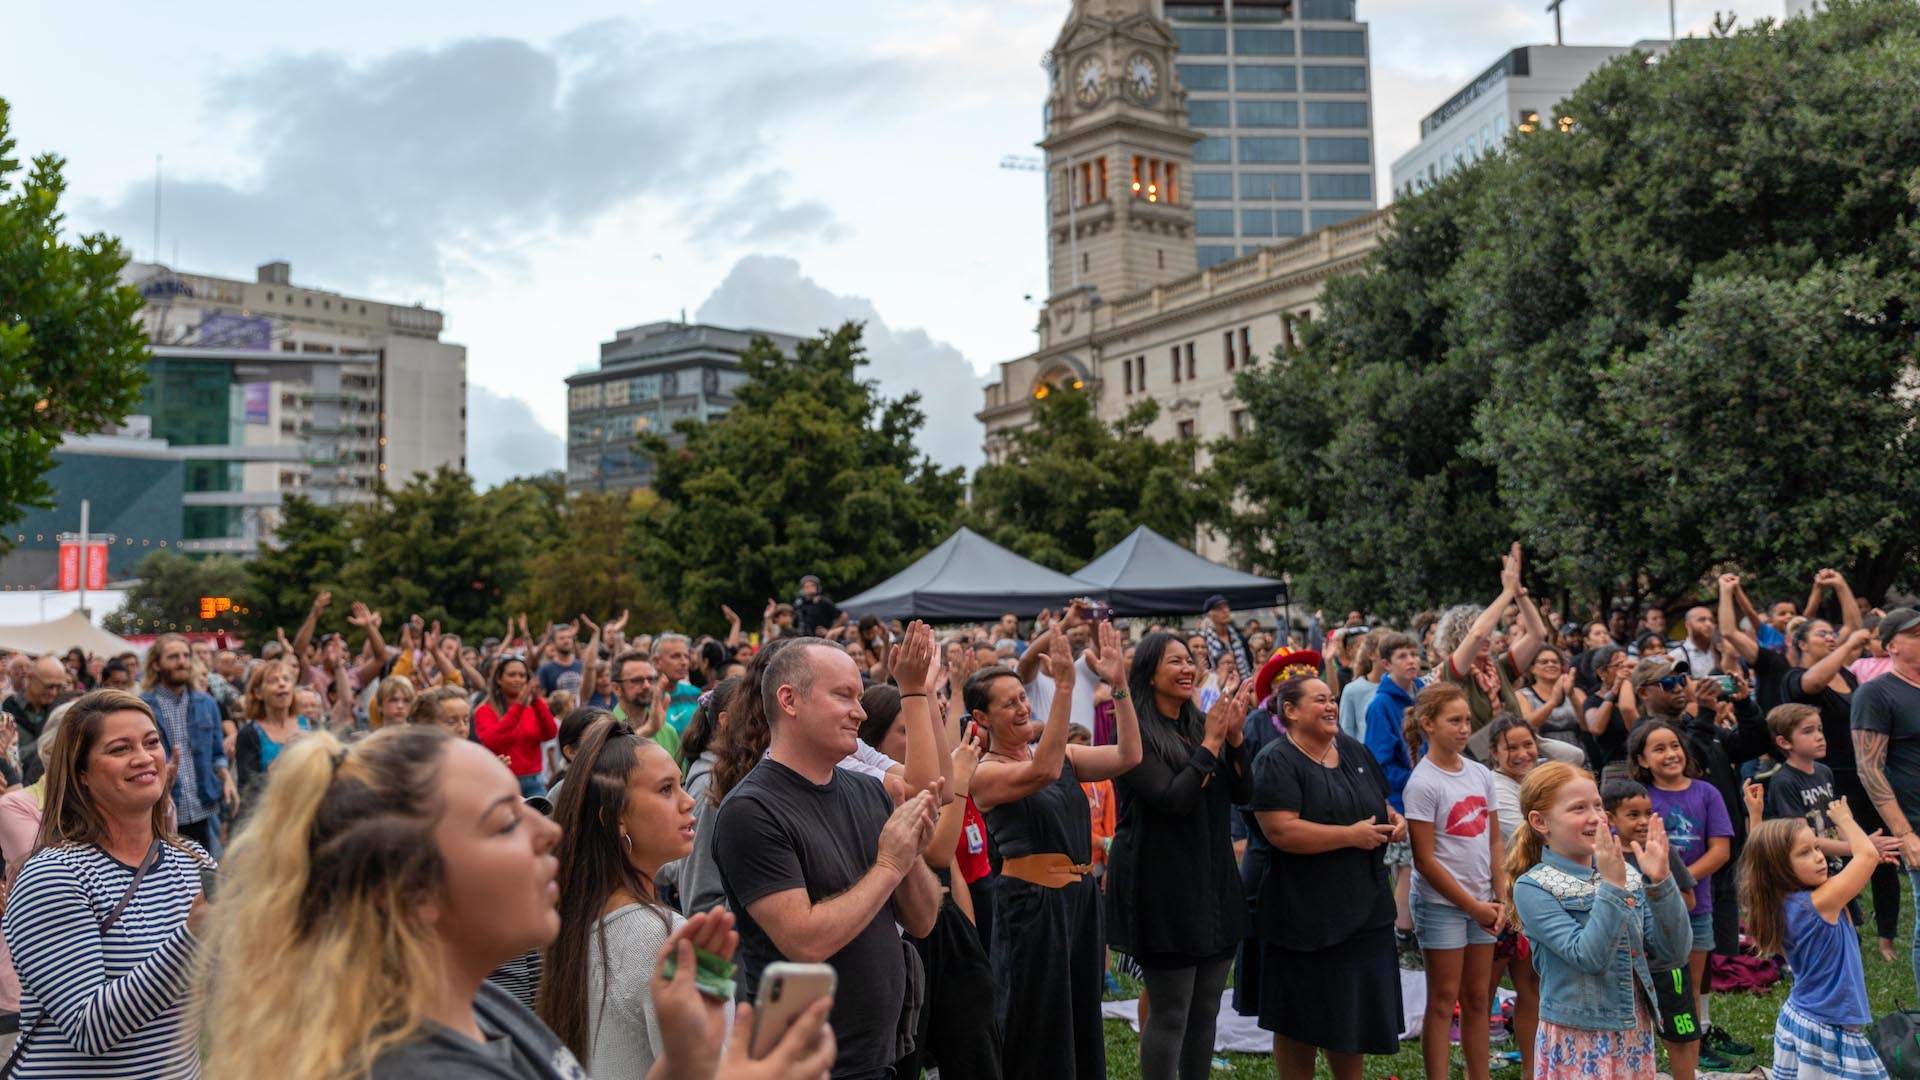 Auckland Arts Festival Will Return Next March With More Than 70 Events Across the City